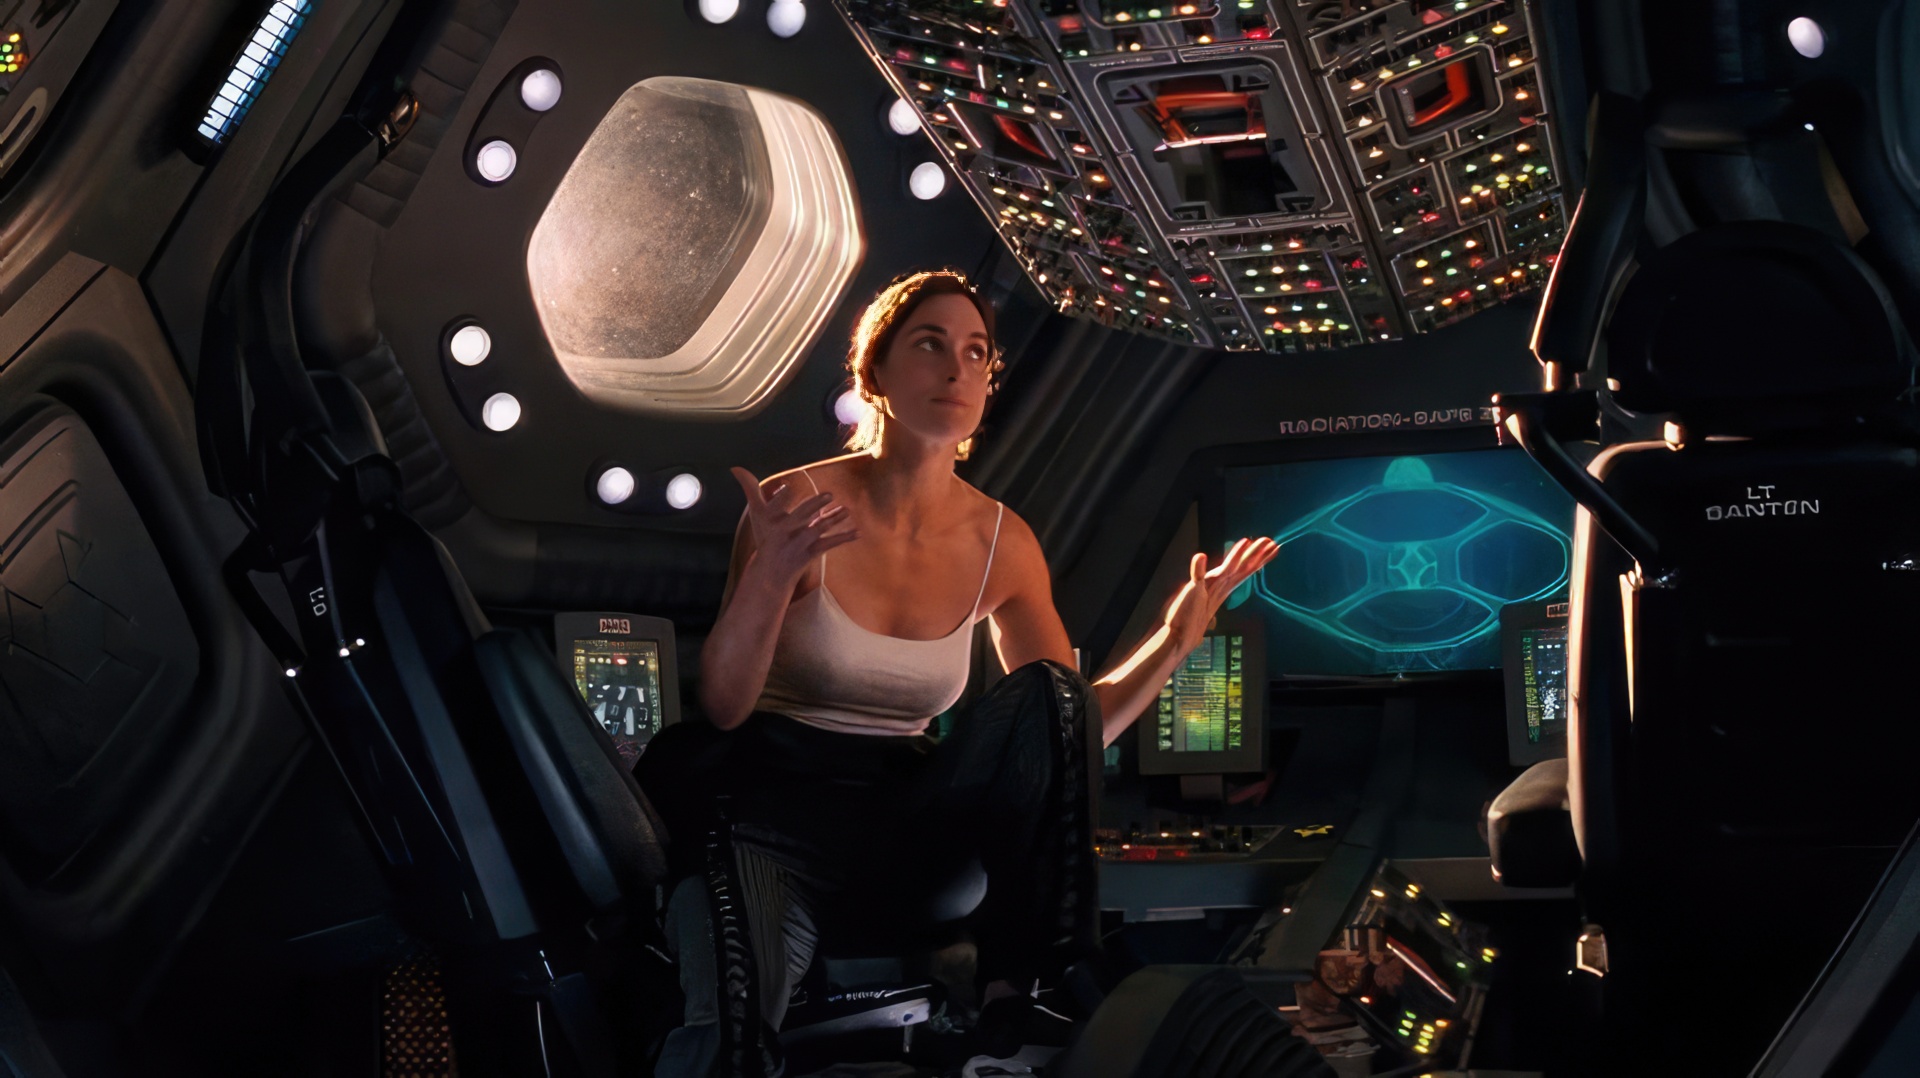 Carrie-Anne Moss in the movie 'Red Planet'